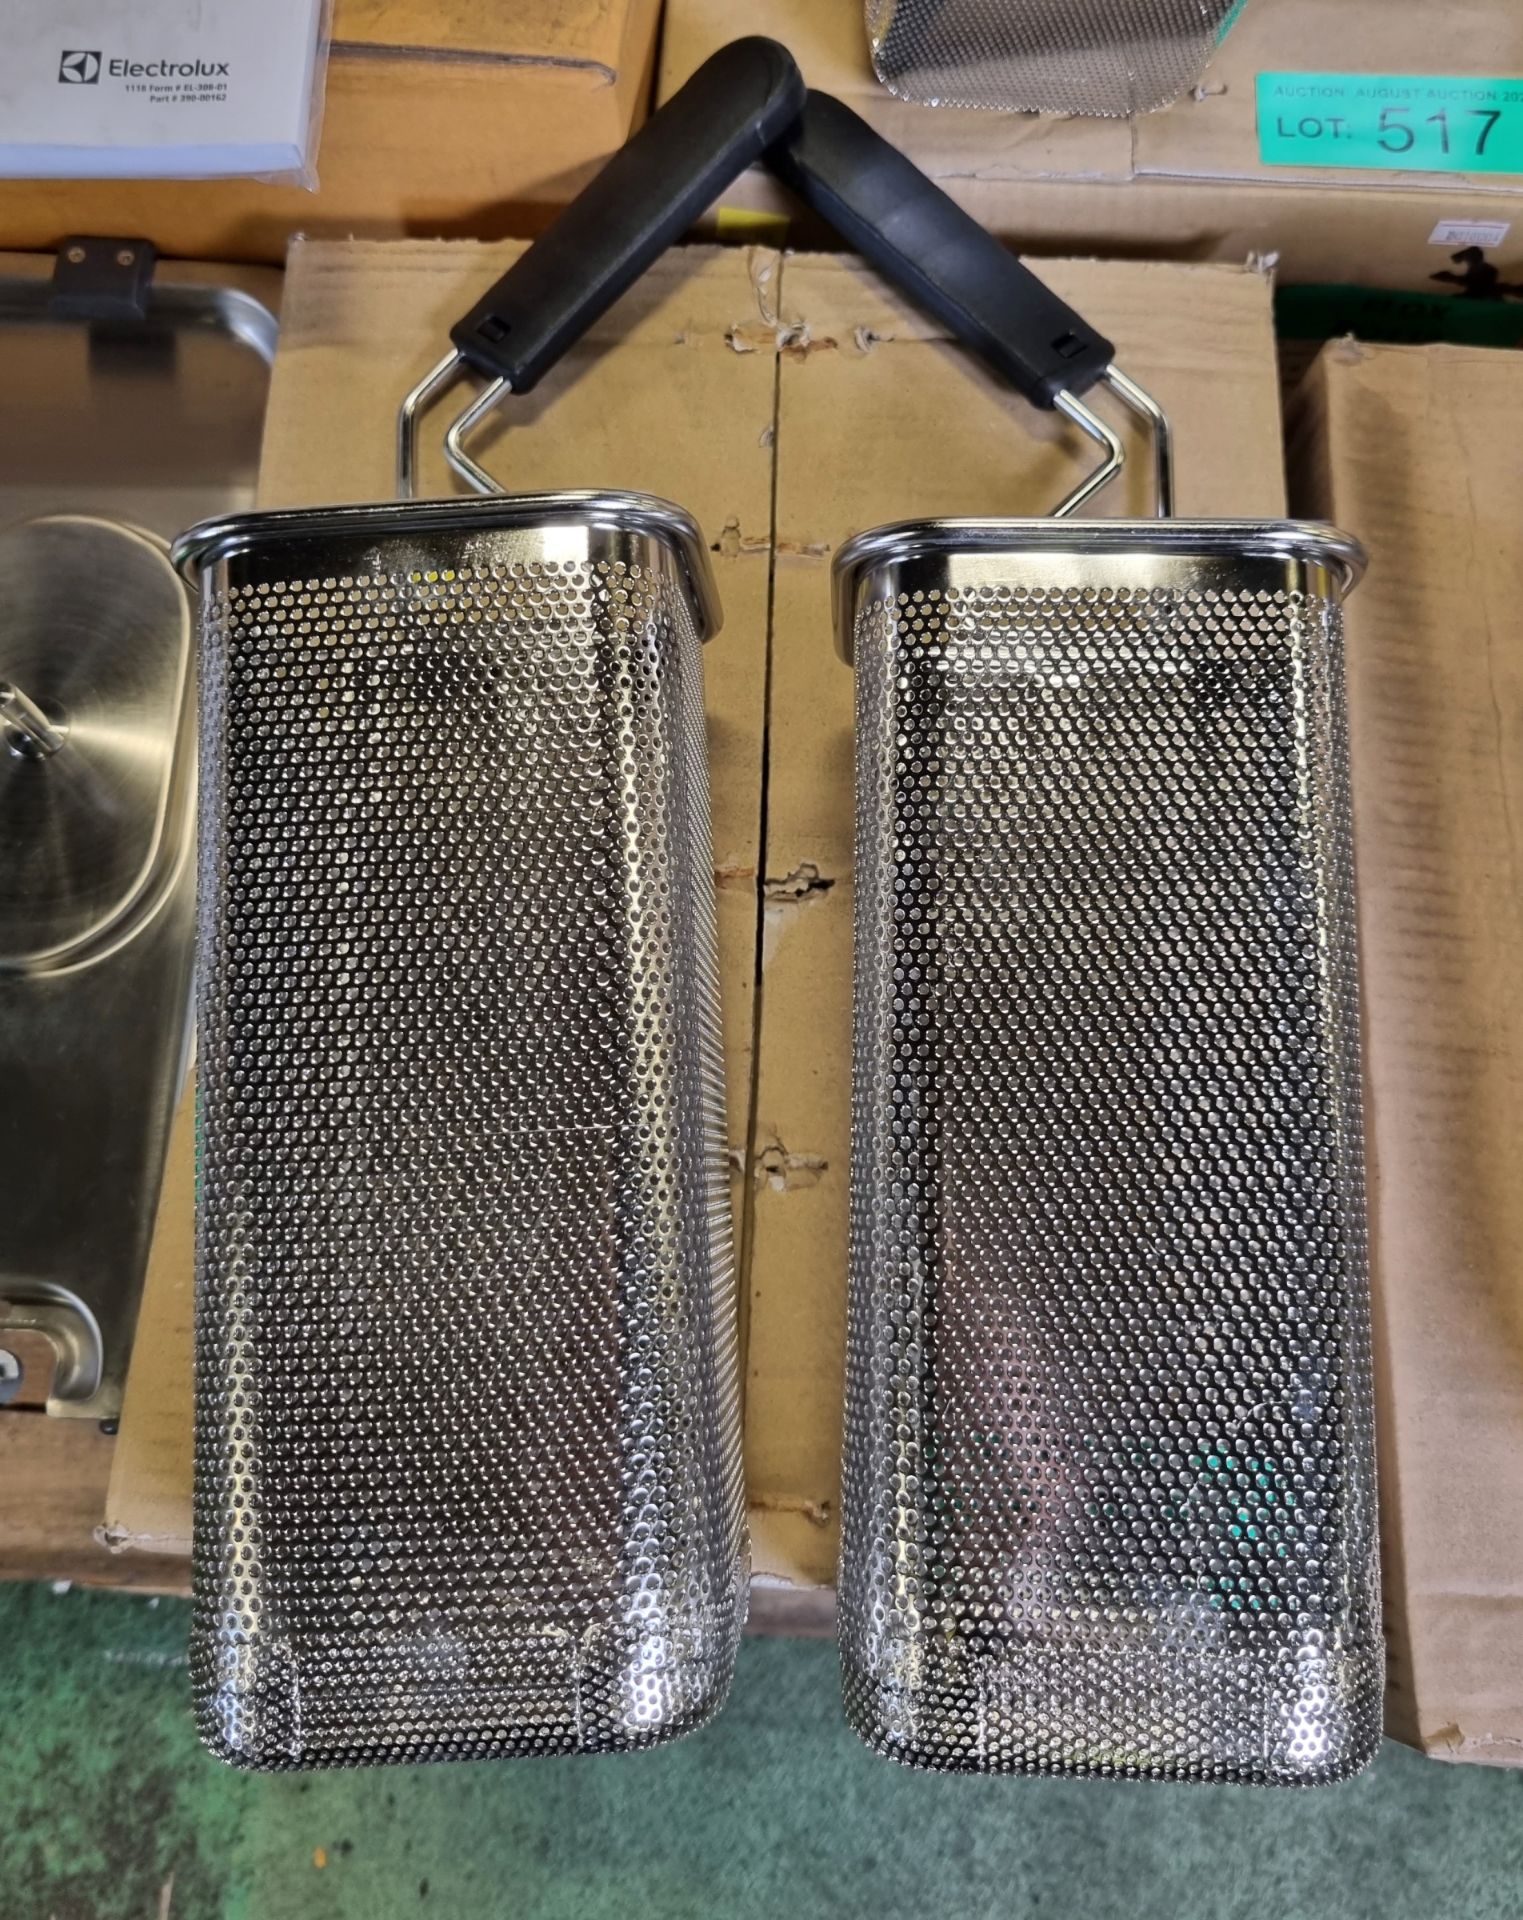 2x Electrolux Baskets for Pasta Cooker - Left and Right - Image 3 of 3